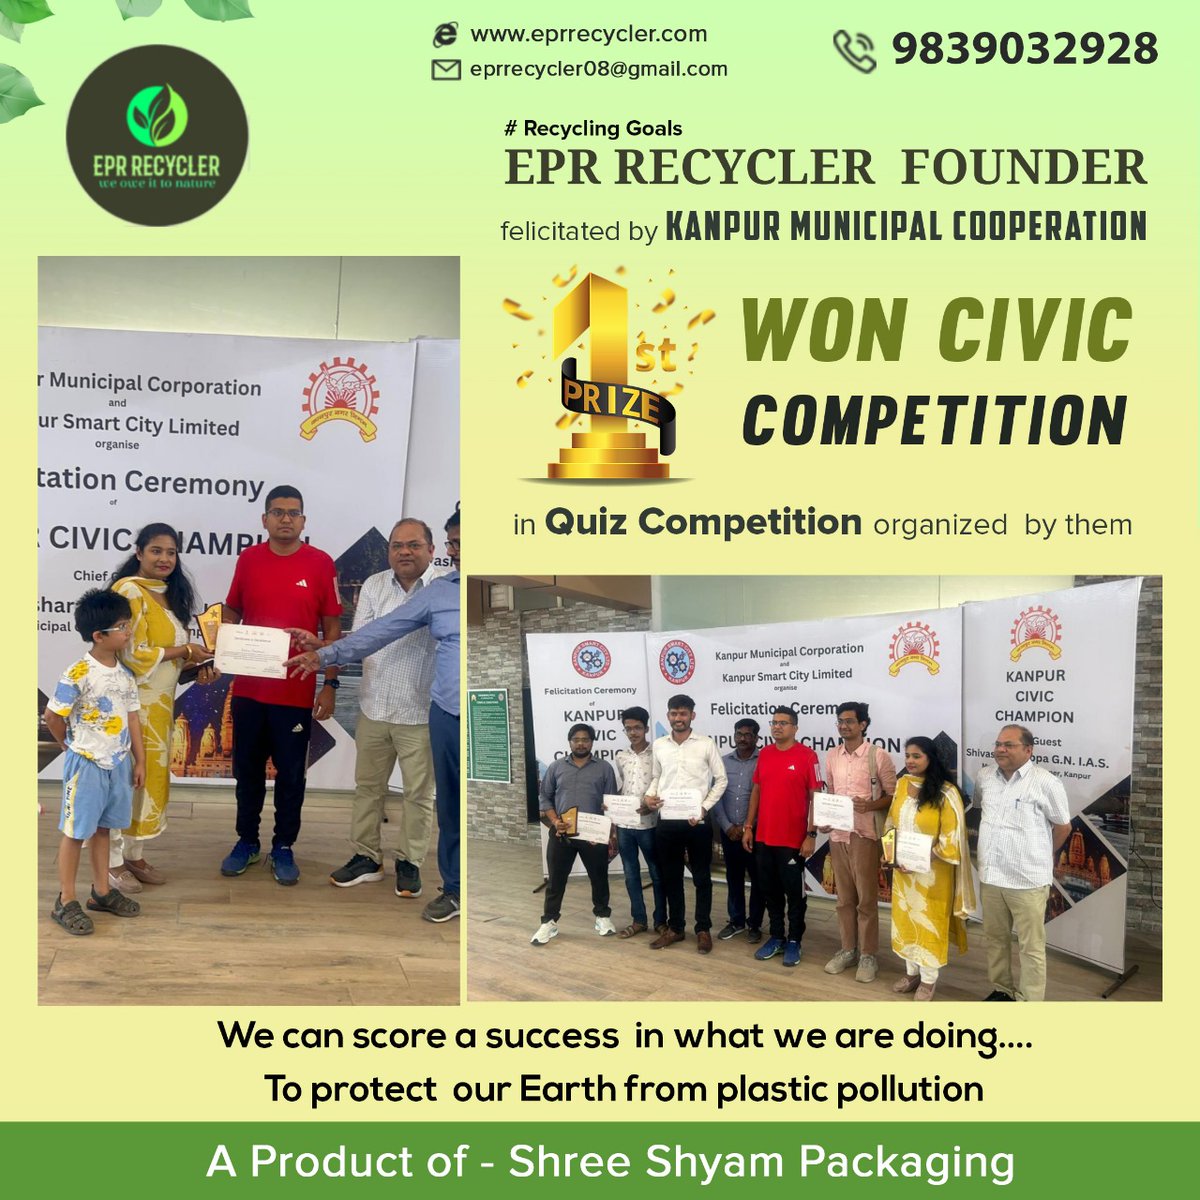 EPR Recycler Founder Wins Civic Competition!

Congratulations to the EPR Recycler team for securing 1st Prize in the Quiz Competition organized by Kanpur Municipal Corporation. #RecyclingGoals #EPRRecycler #KanpurMunicipalCorporation #Sustainability #PlasticPollution